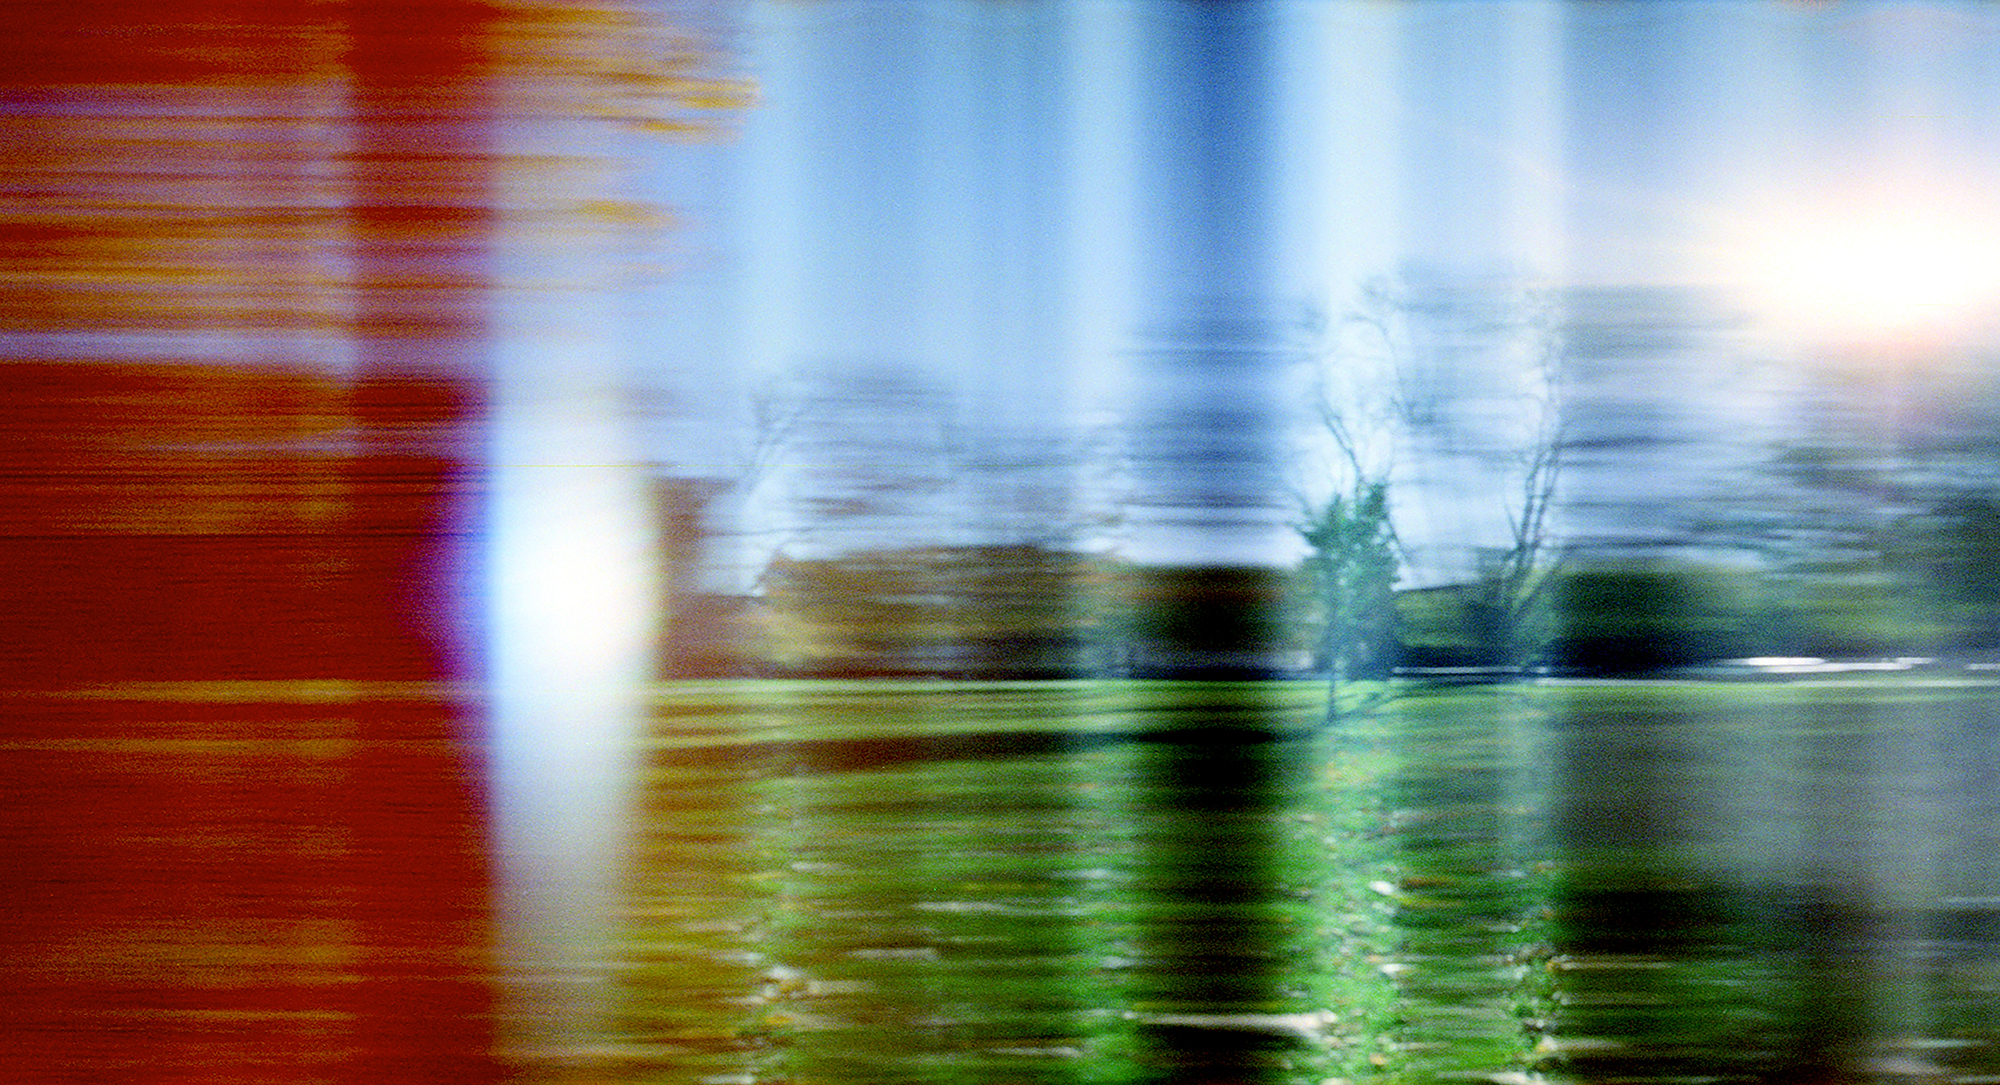 a still image from Michael Gibisser's film Slow Volumes